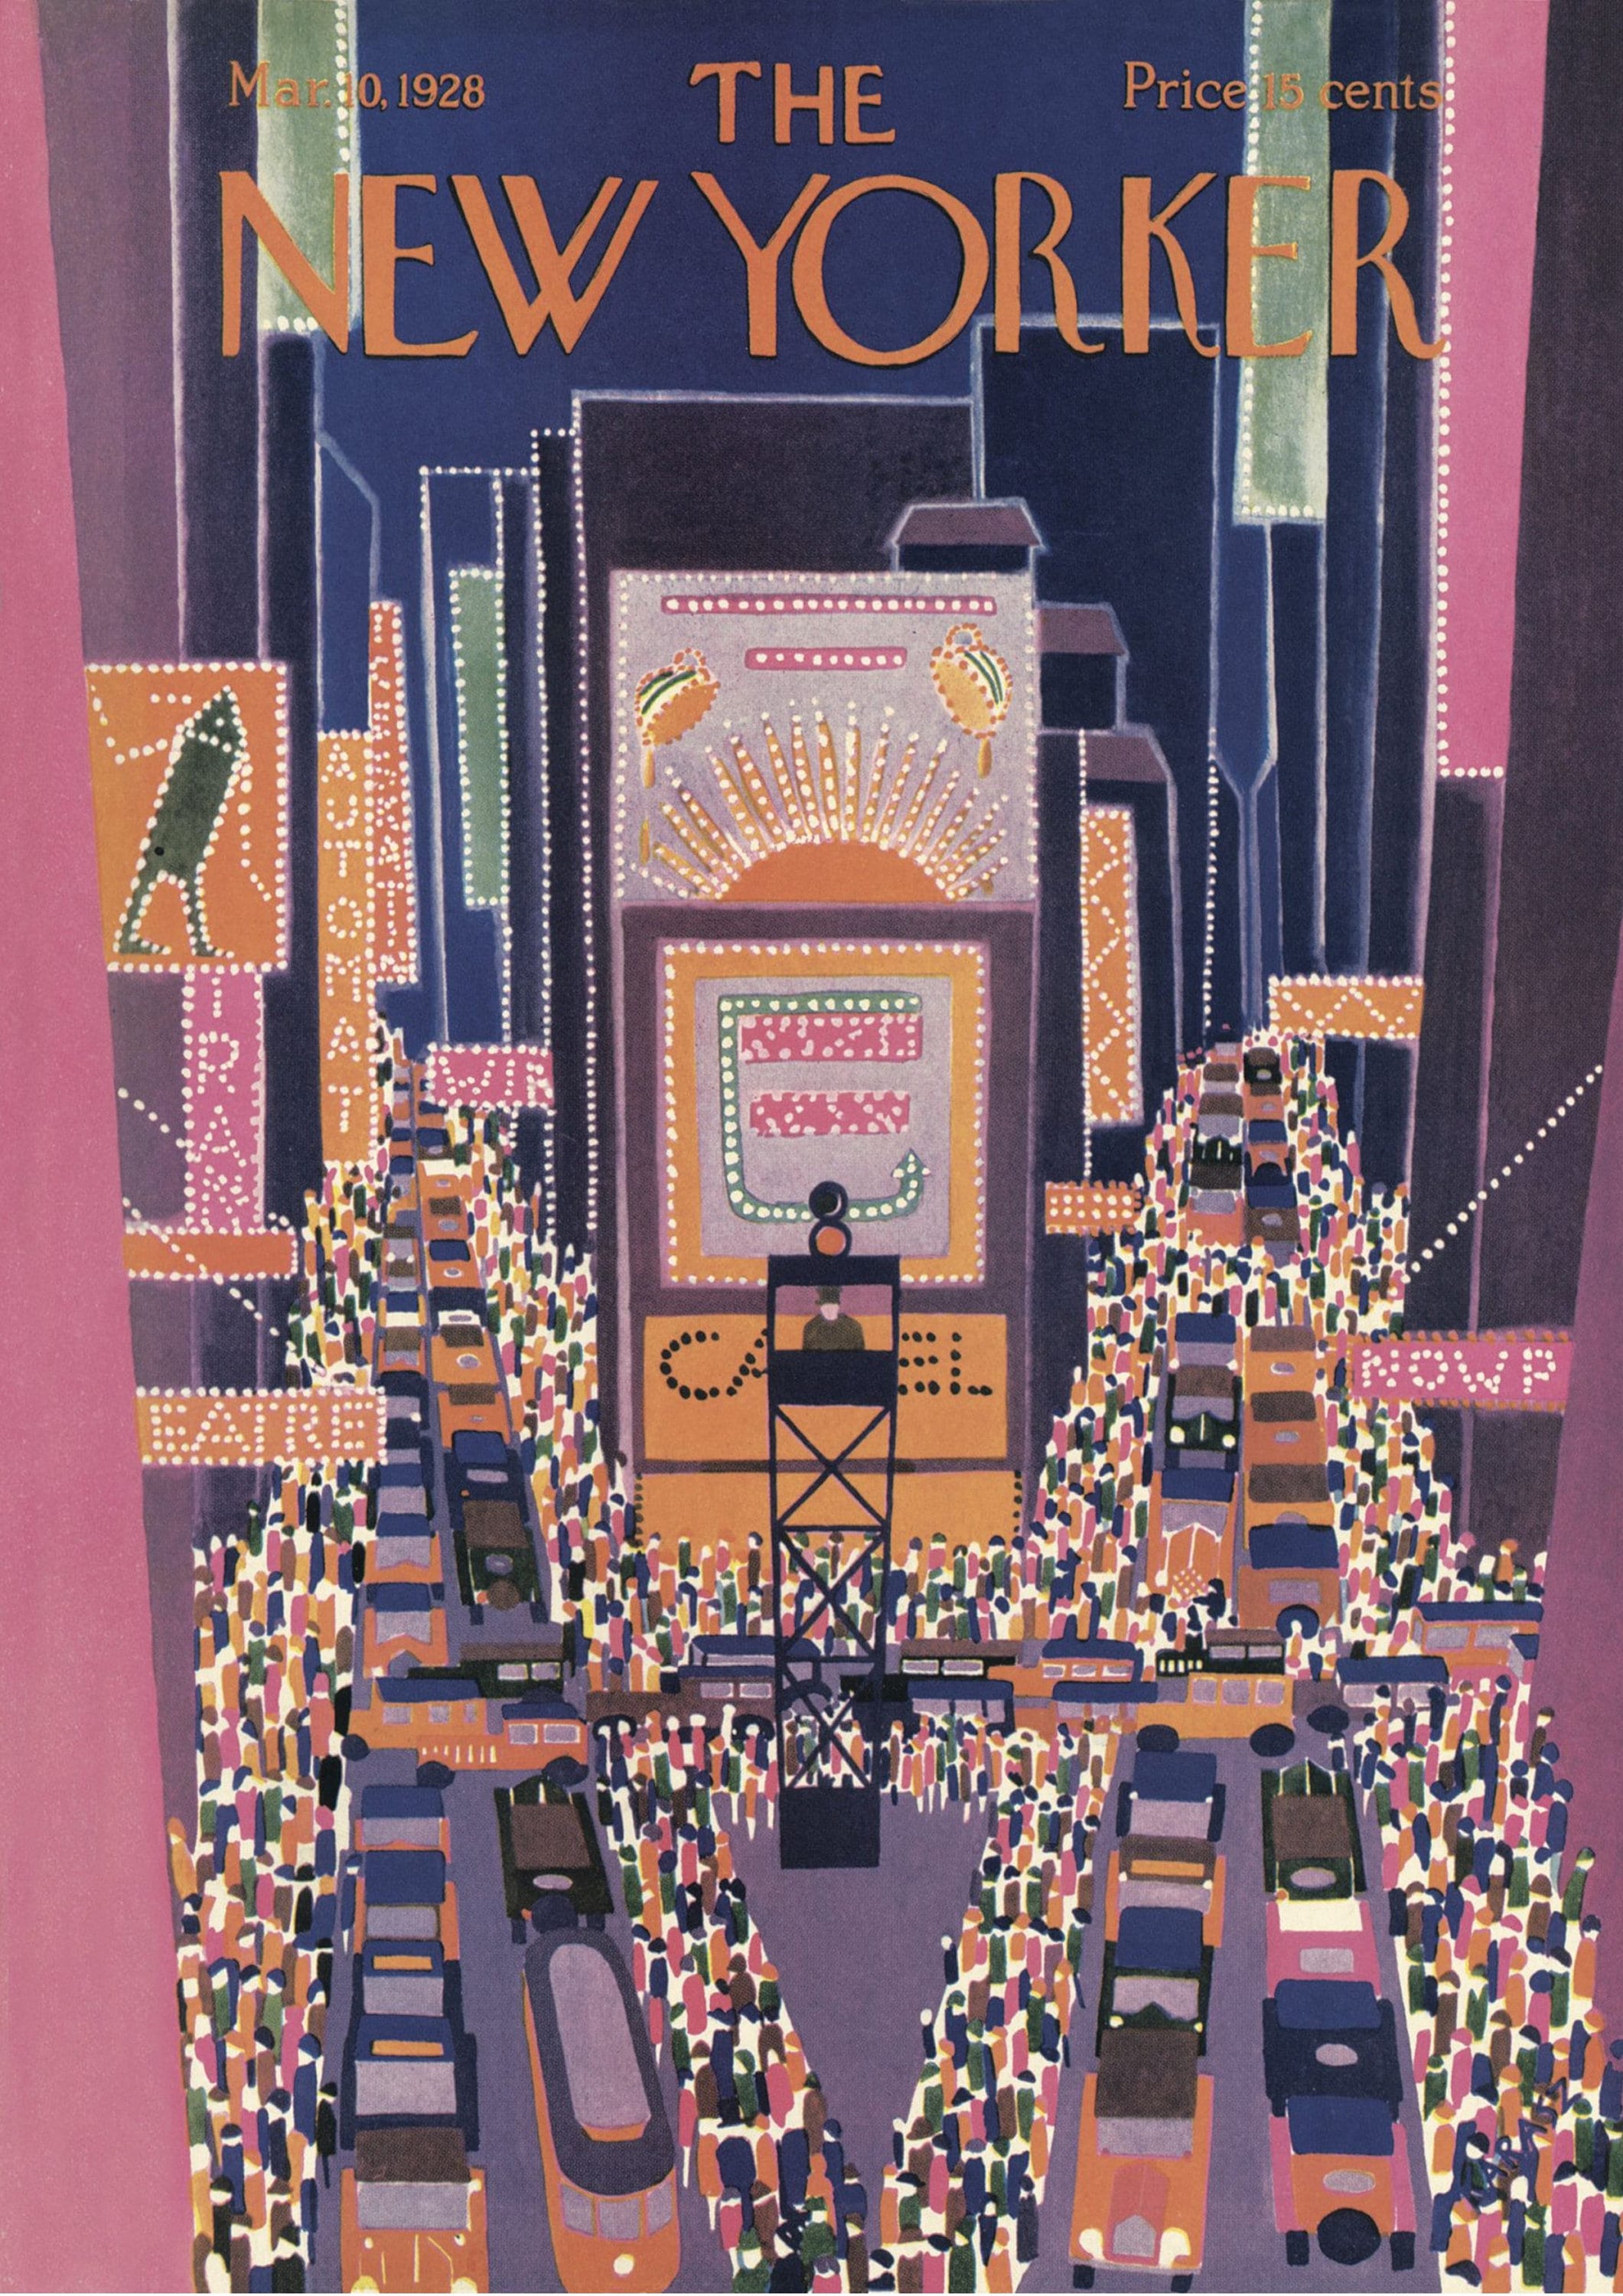 New yorker magazine new yorker cover new yorker poster new Etsy